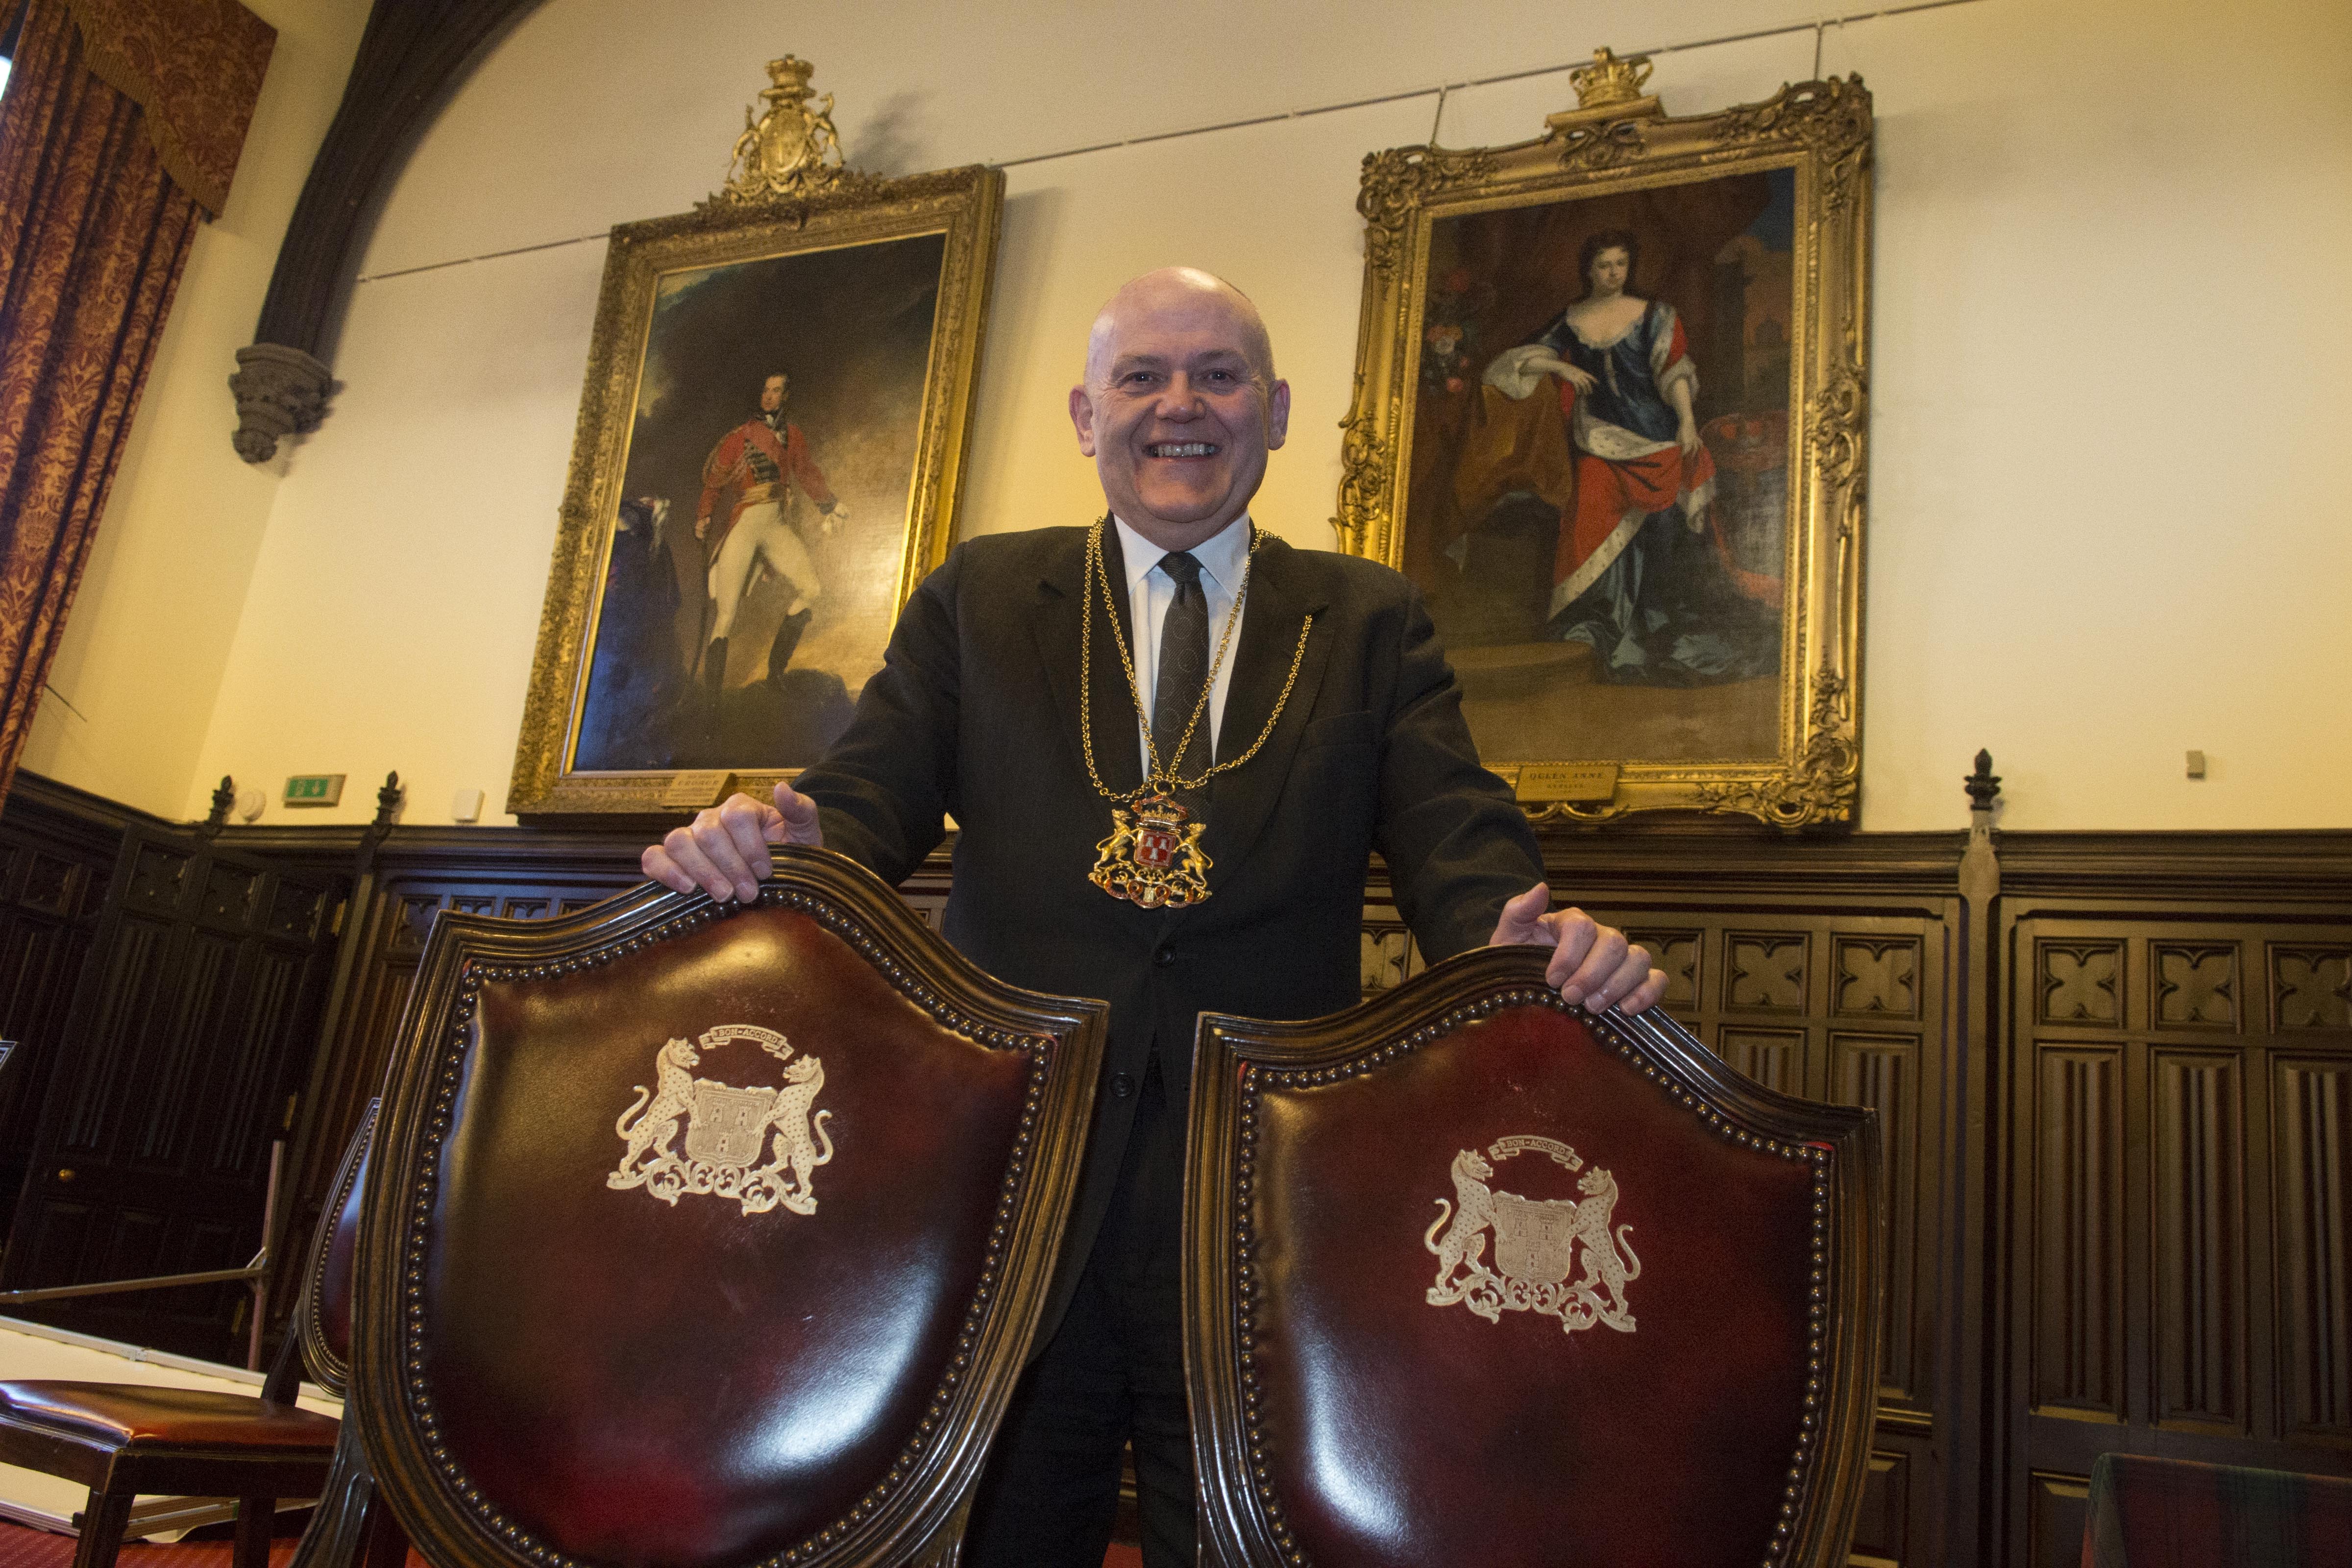 22/01/19 The Lord provost Barney Crockett next to the portrait of Queen Anne trhat hangs in the Aberdeeen Town House who is the subject of a new film in cinemas, The Favourite